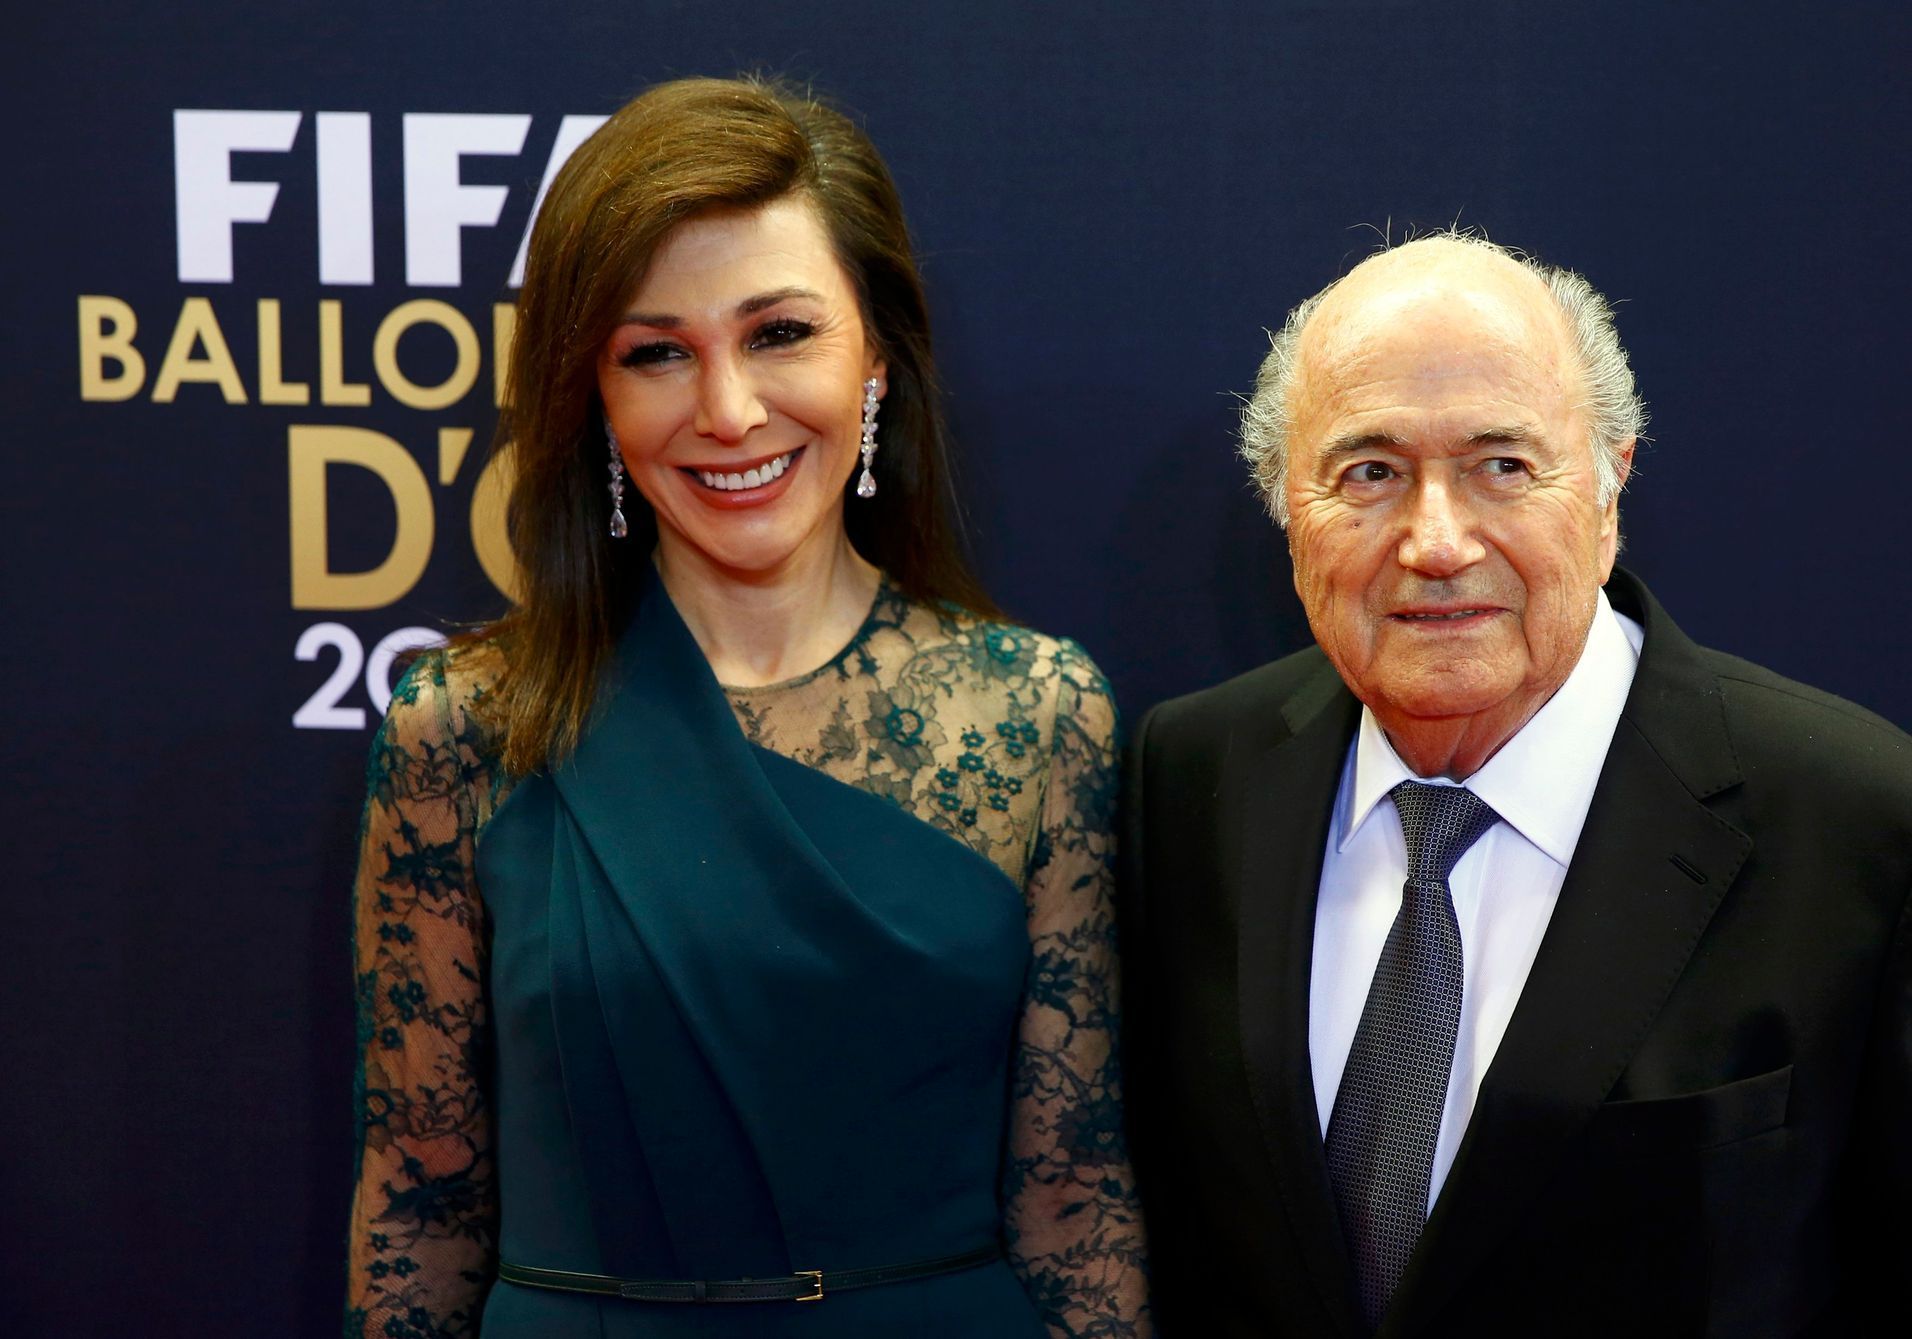 FIFA President Blatter and Barras arrive for the FIFA Ballon d'Or 2014 soccer awards ceremony at the Kongresshaus in Zurich